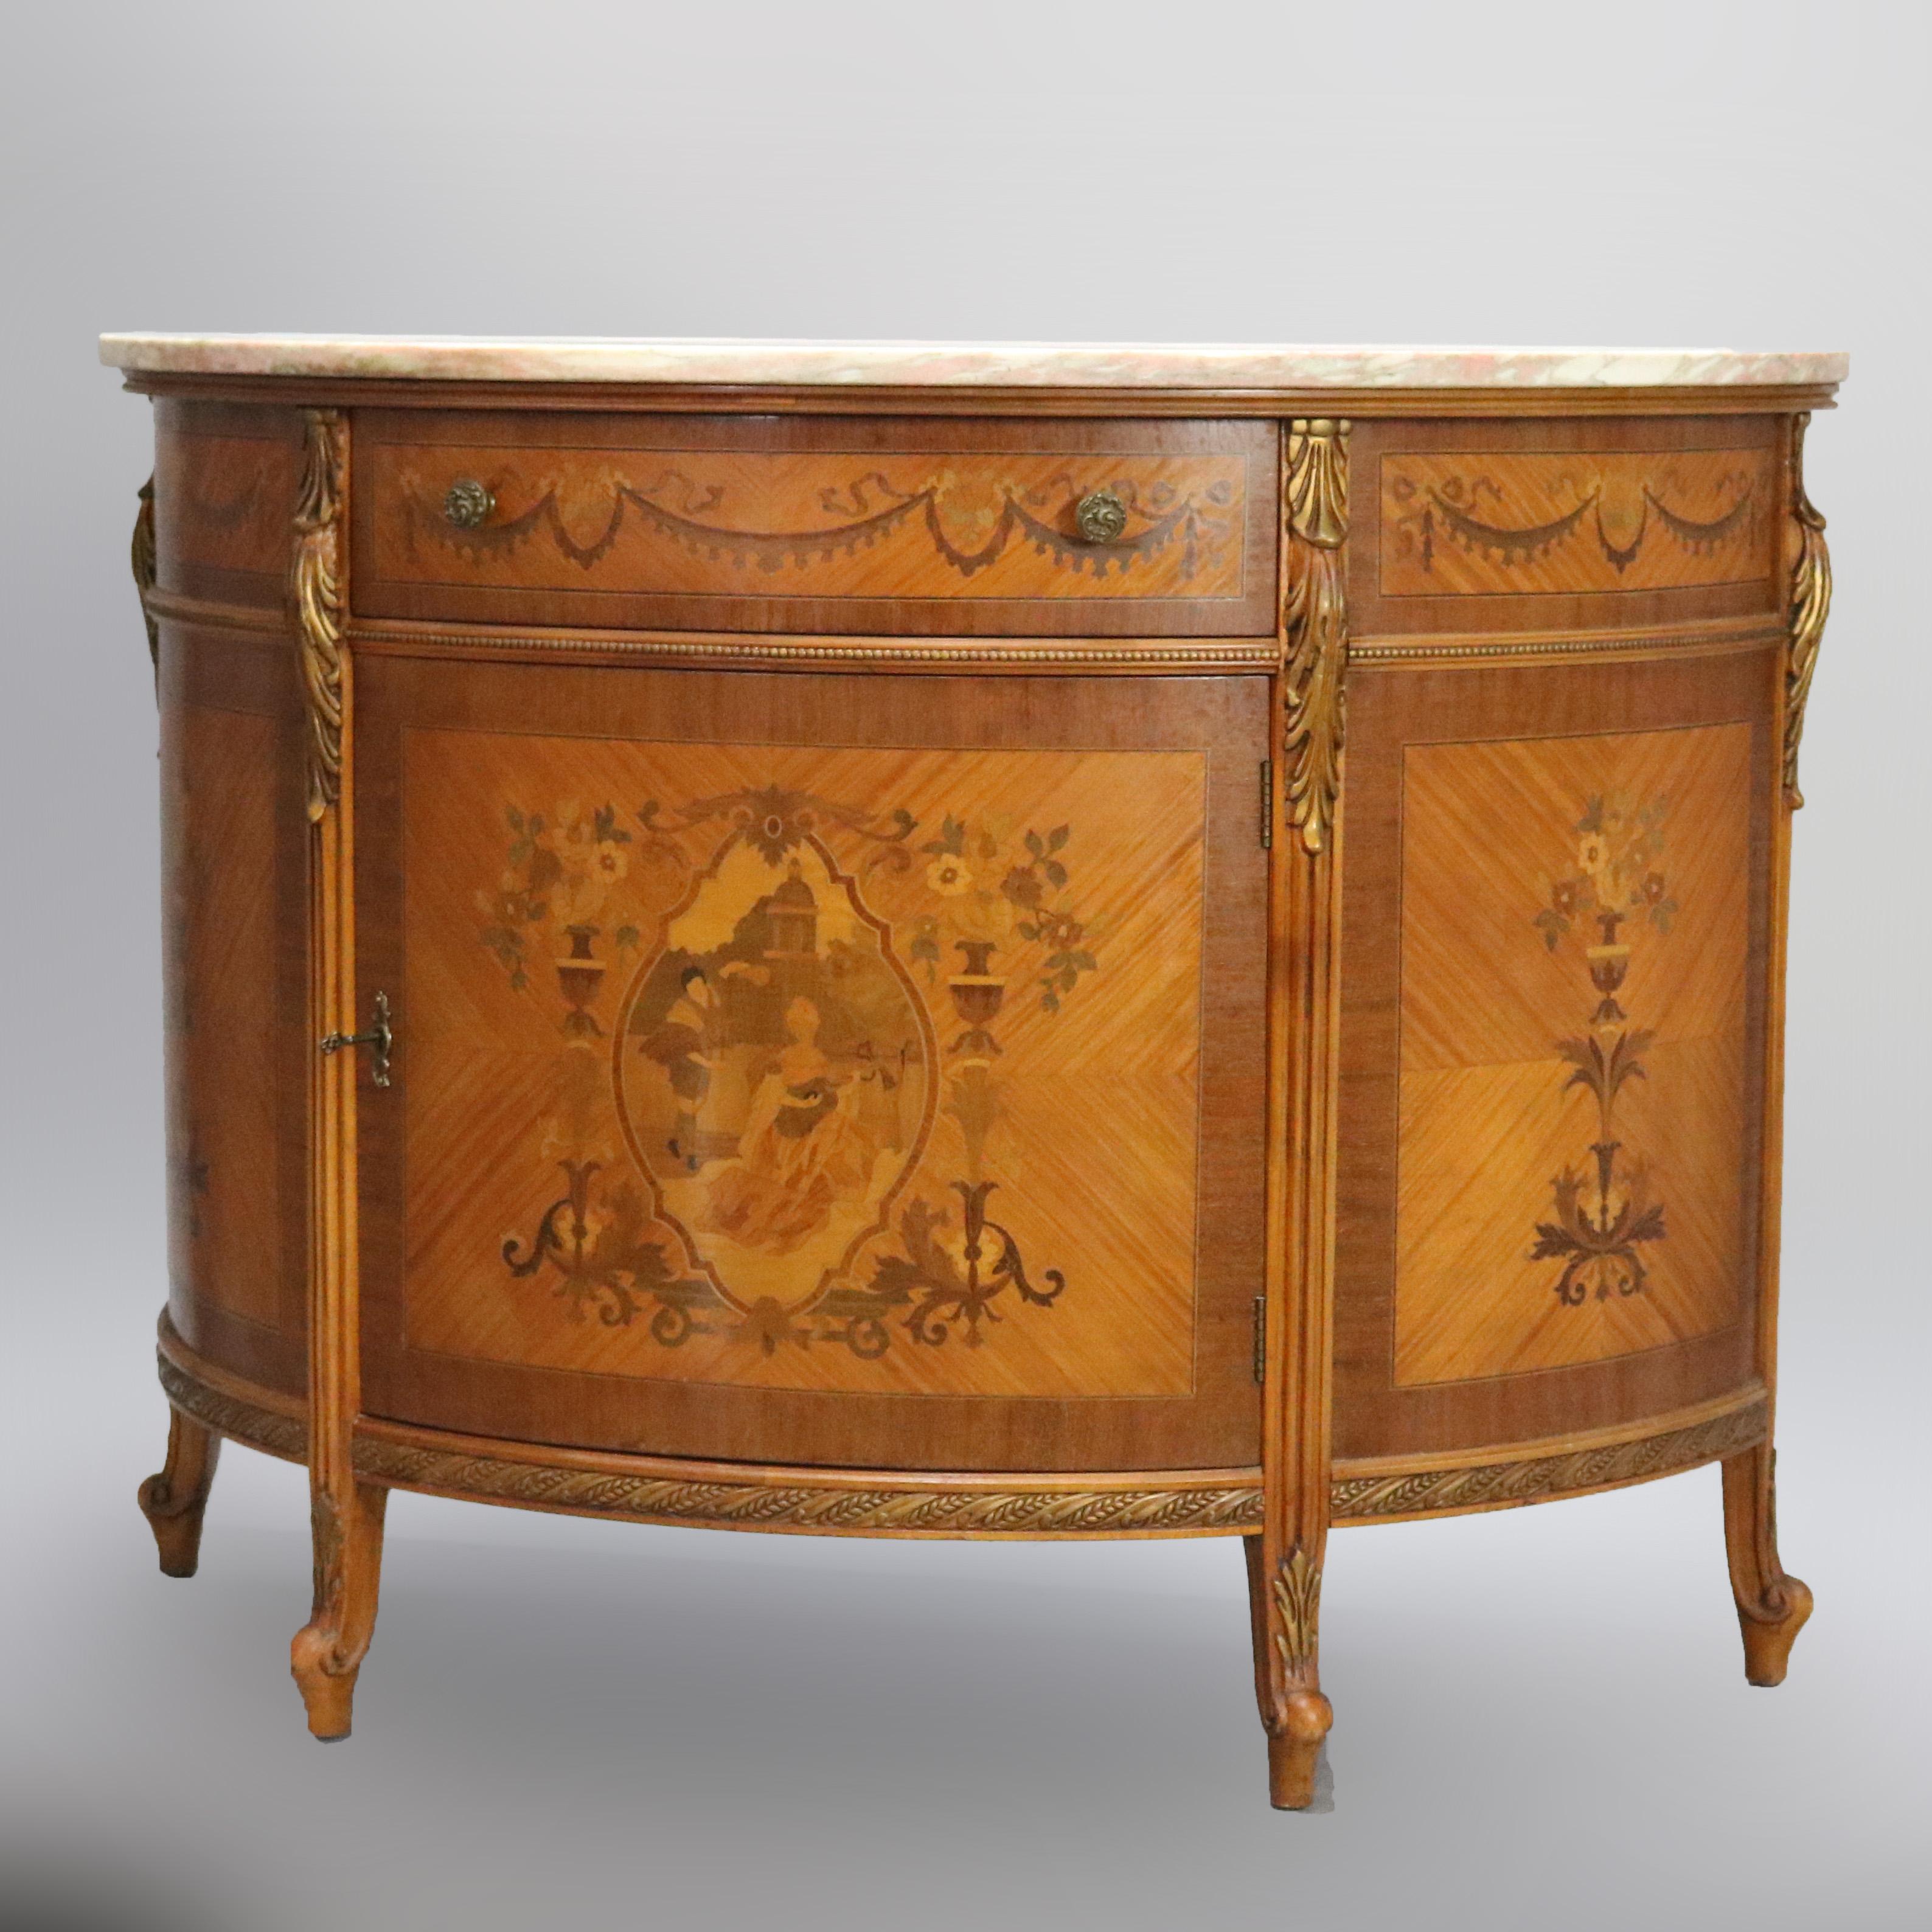 An antique French Louis XVI credenza offers demilune form with marble top surmounting mahogany and satinwood inlaid case with frieze drawer over single door lower cabinet with Dutch marquetry foliate, garland, panier de fleurs and central courting